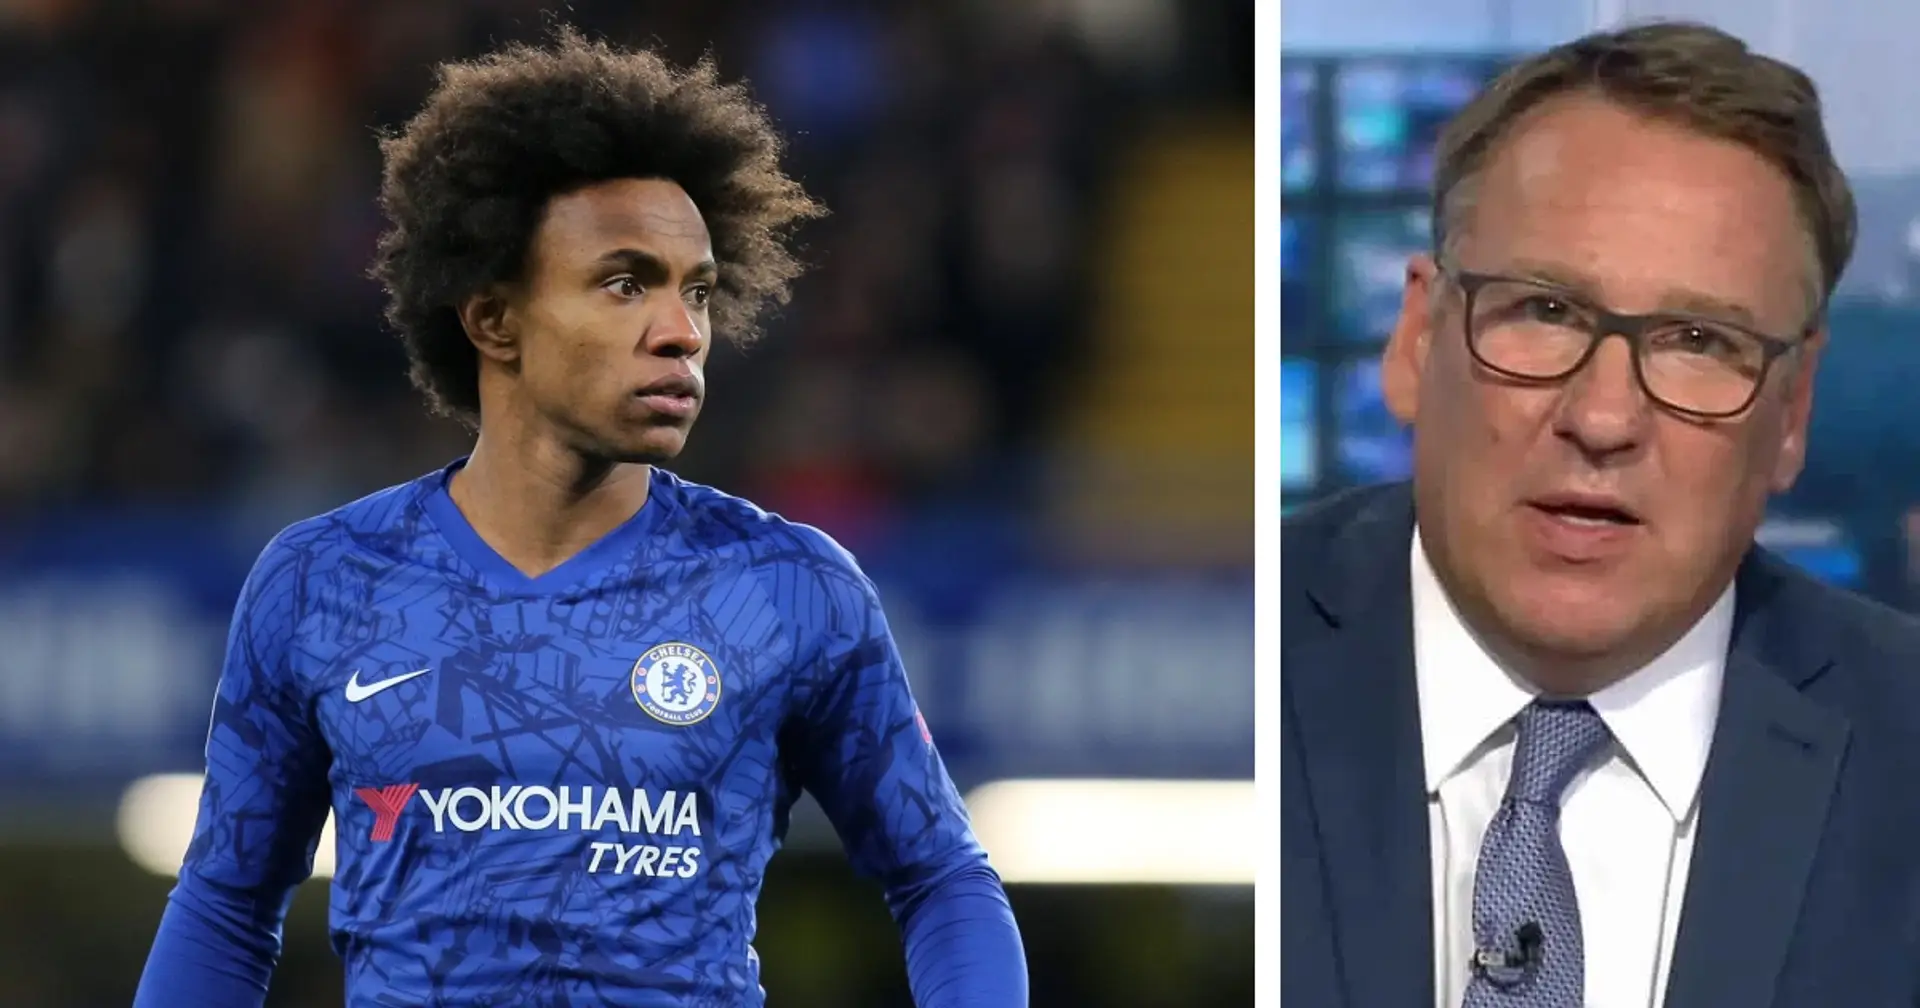 Merson gives 7 reasons why Arsenal will land a coup if they sign Willian